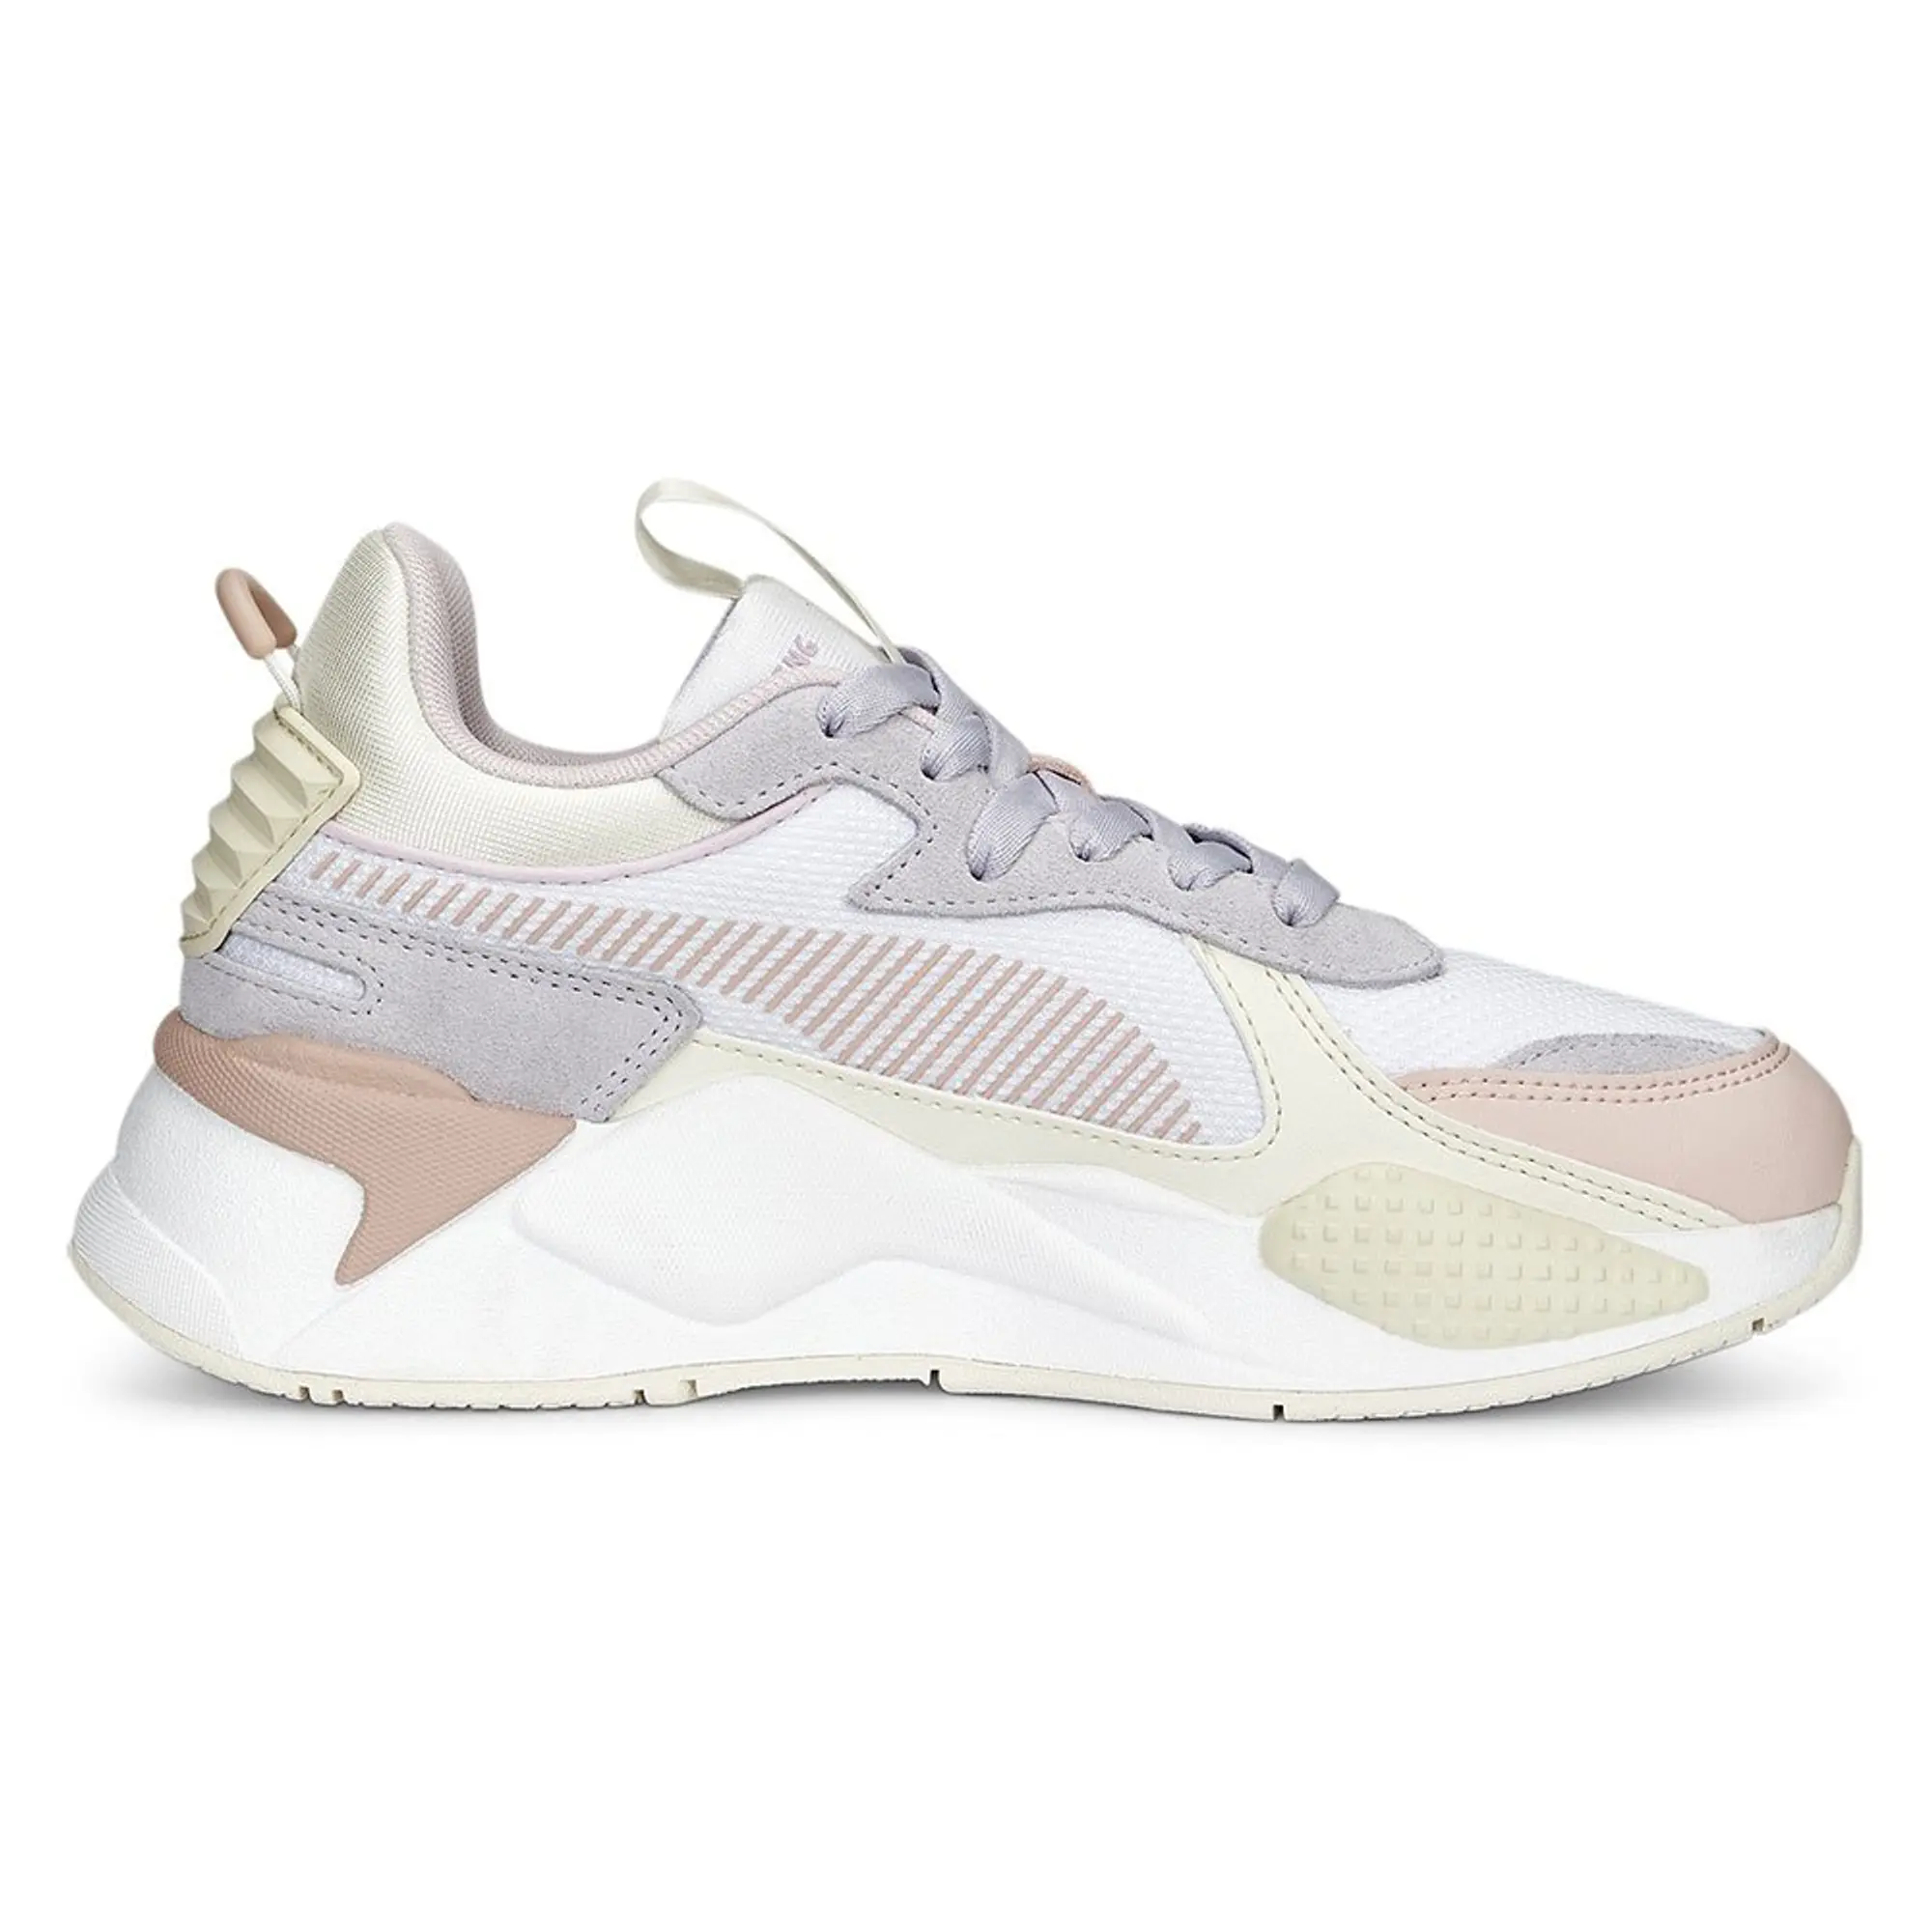 PUMA RS-X Candy Sneakers Women, White/Spring Lavender